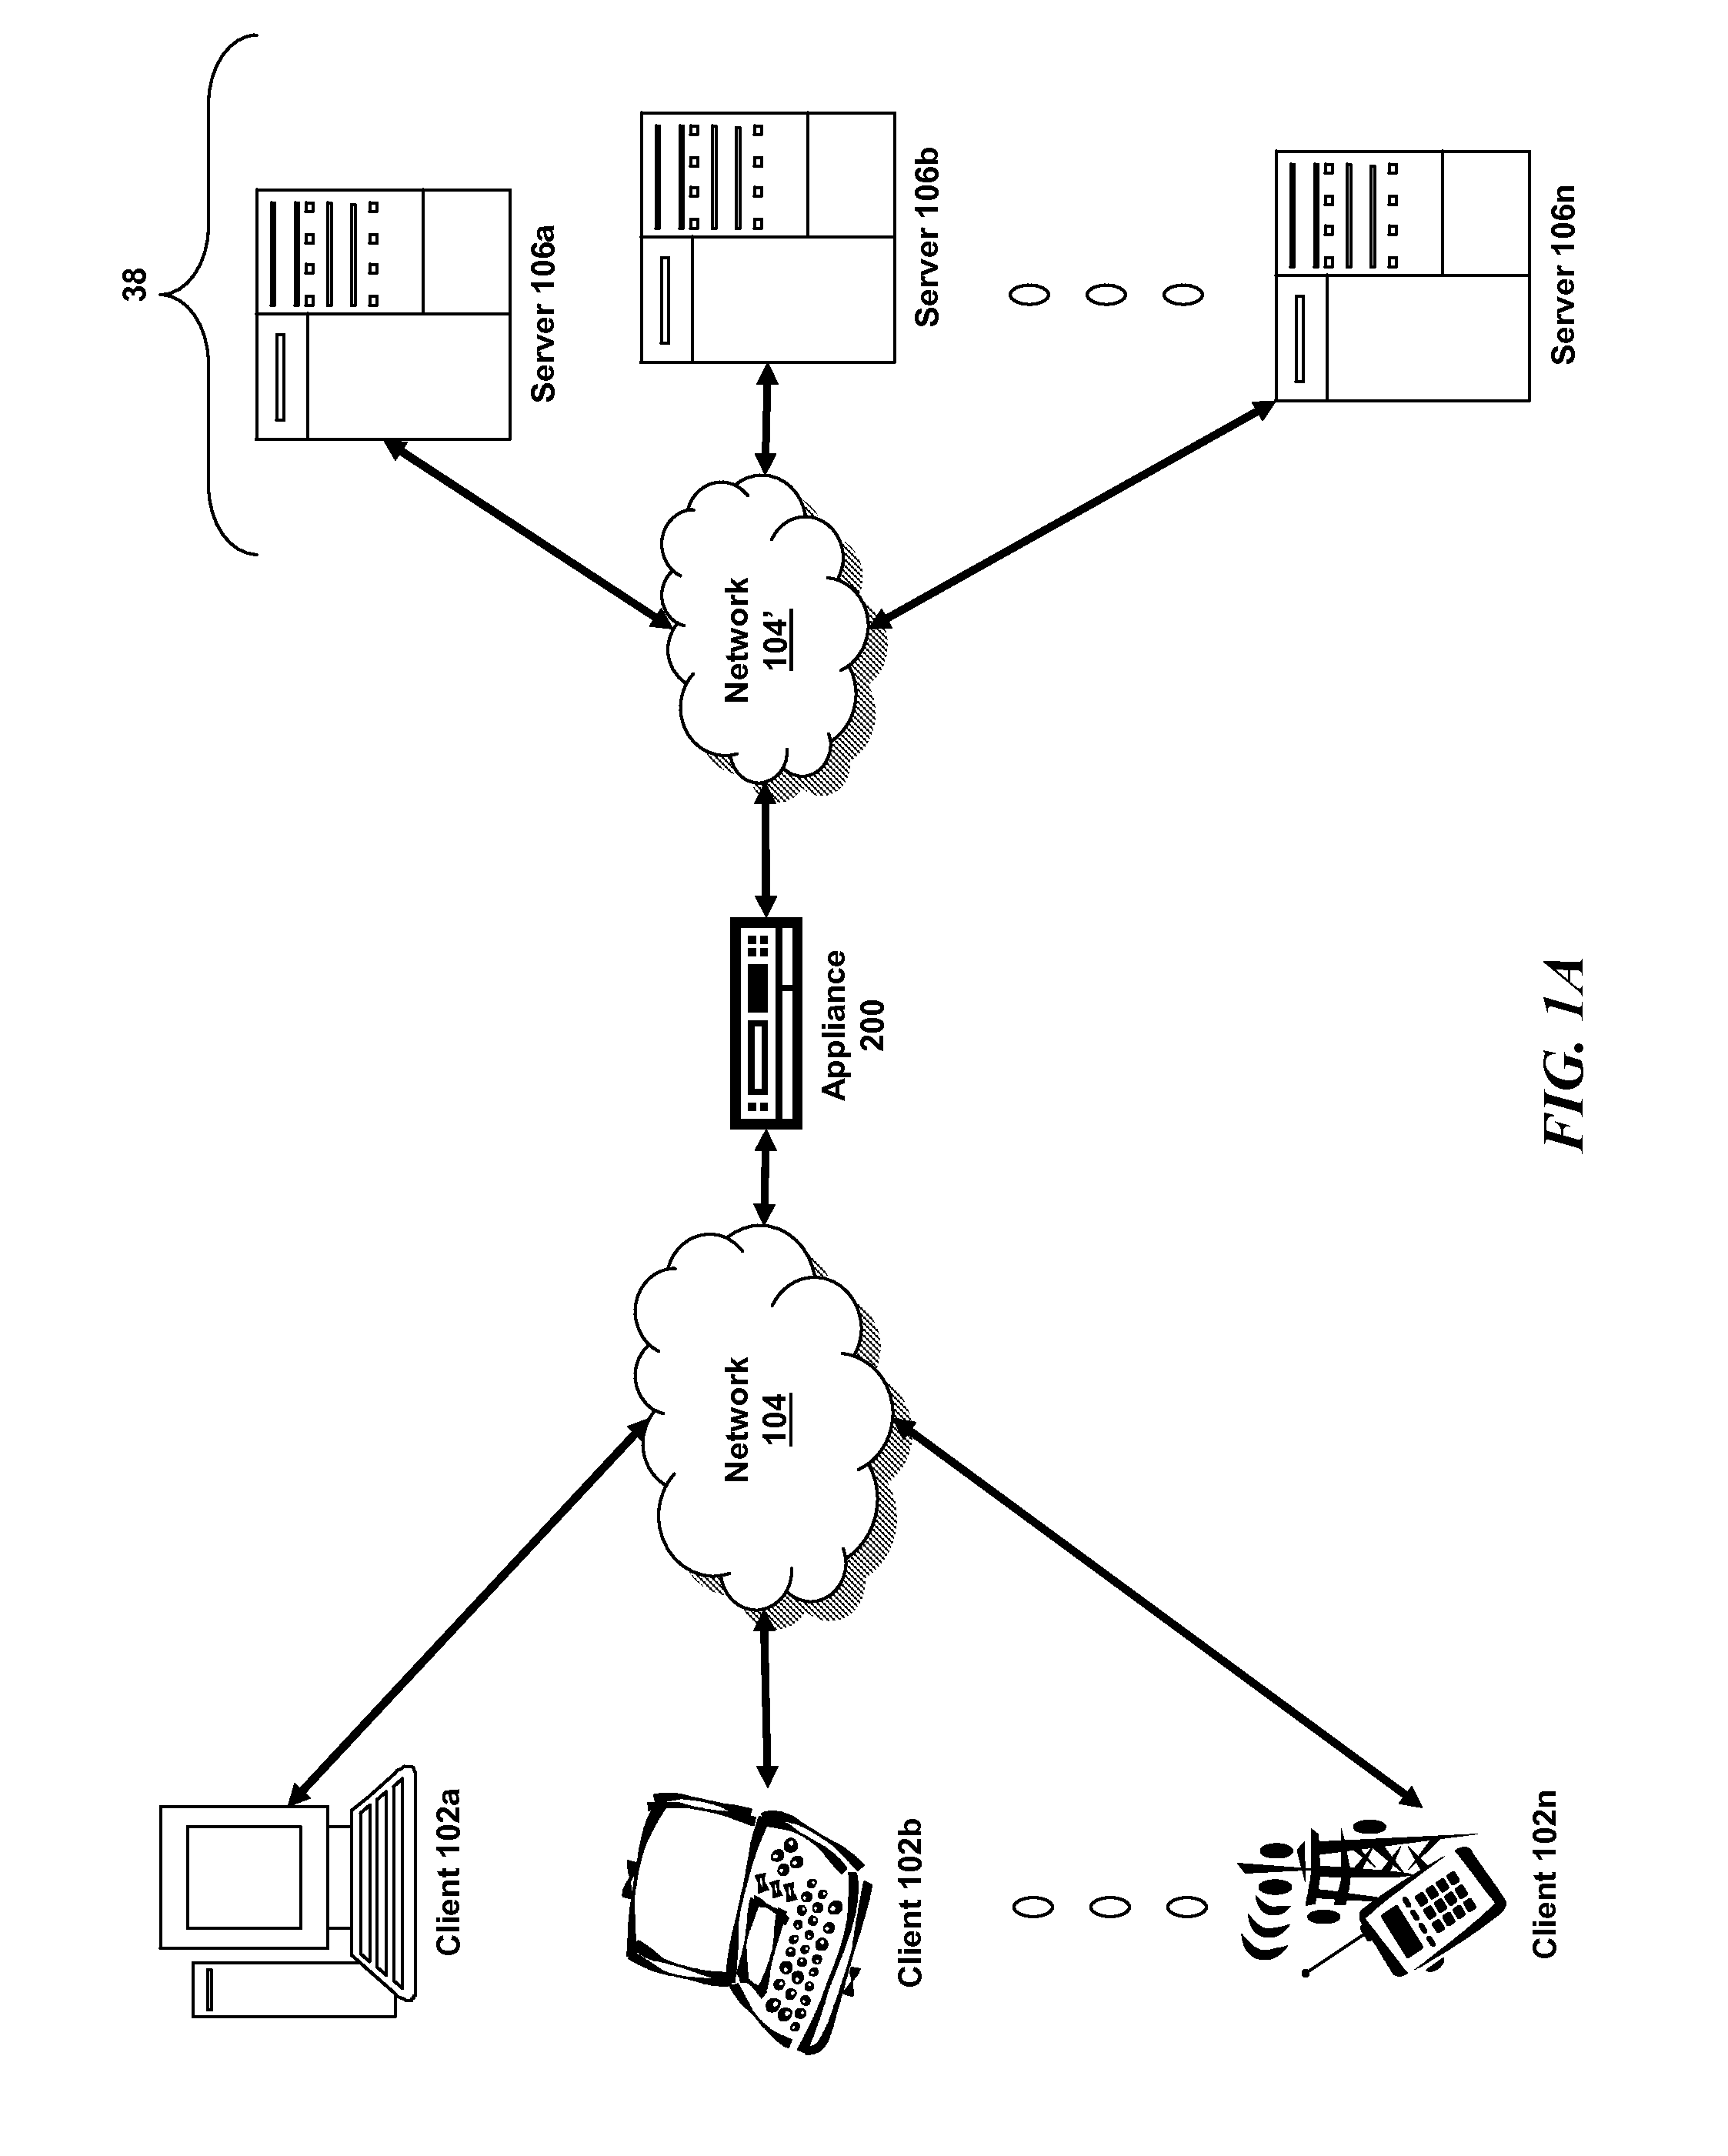 Systems and Methods for Database Proxy Request Switching